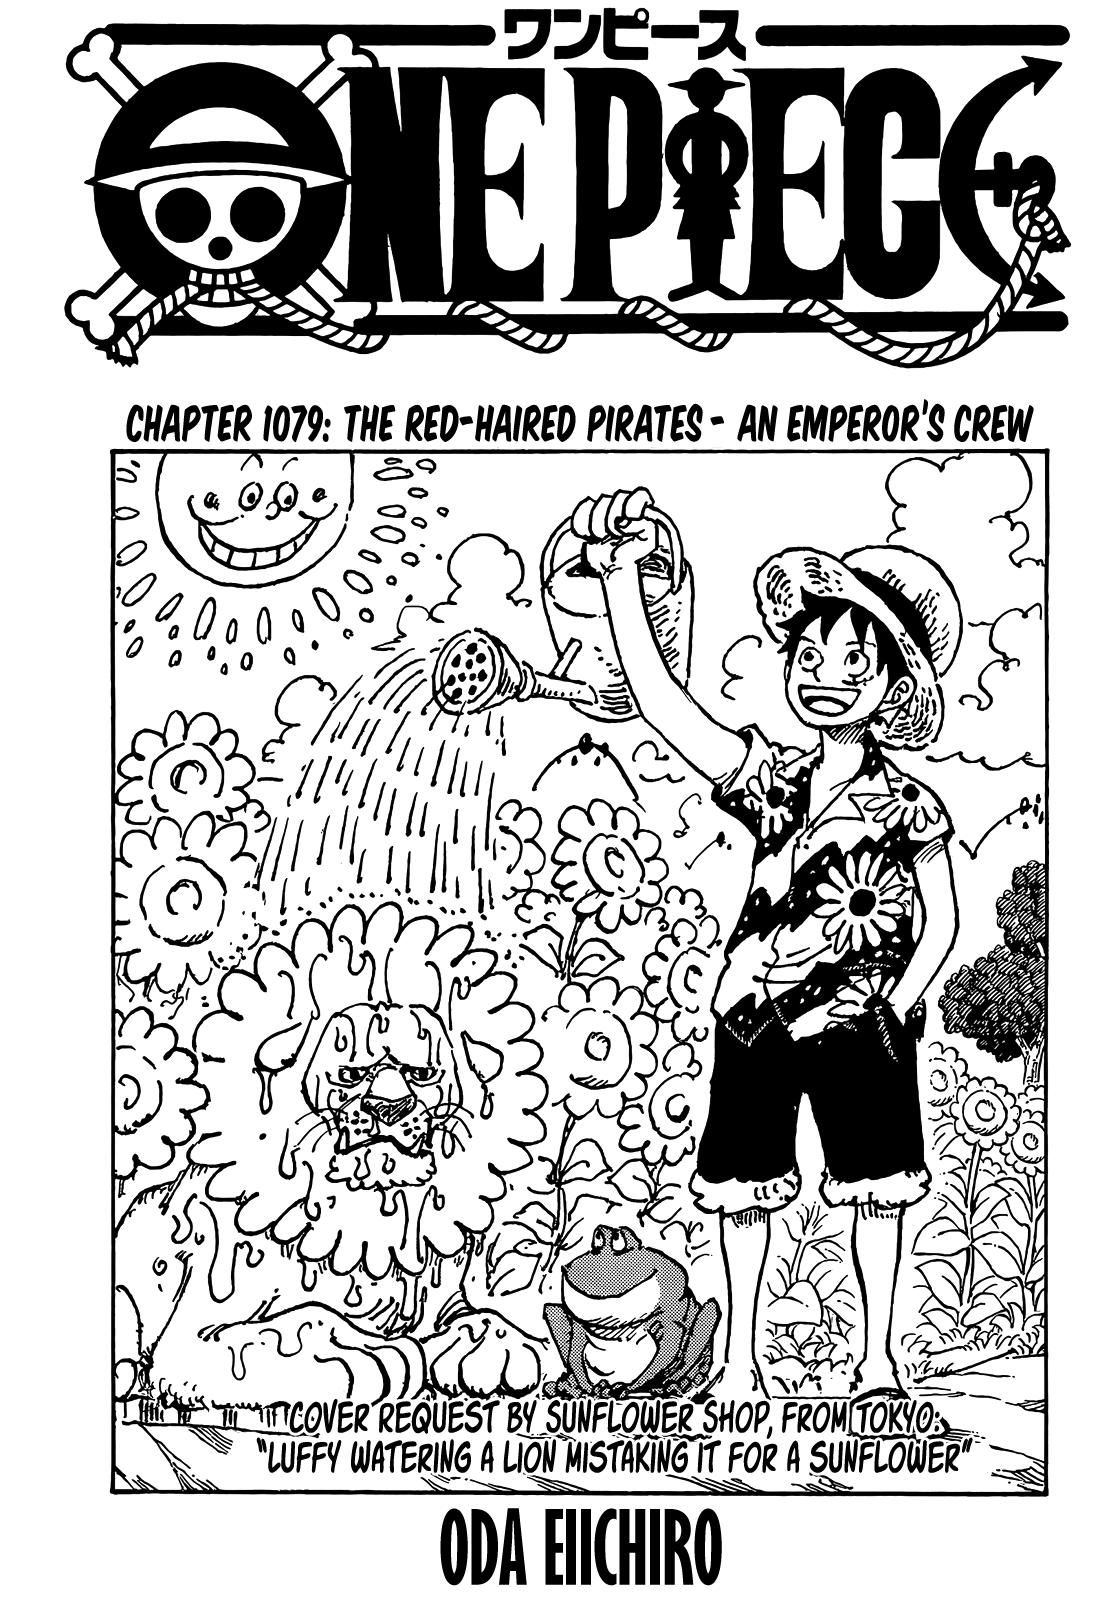 One Piece Chapter 1057 - The New Straw Hats Invited by Luffy